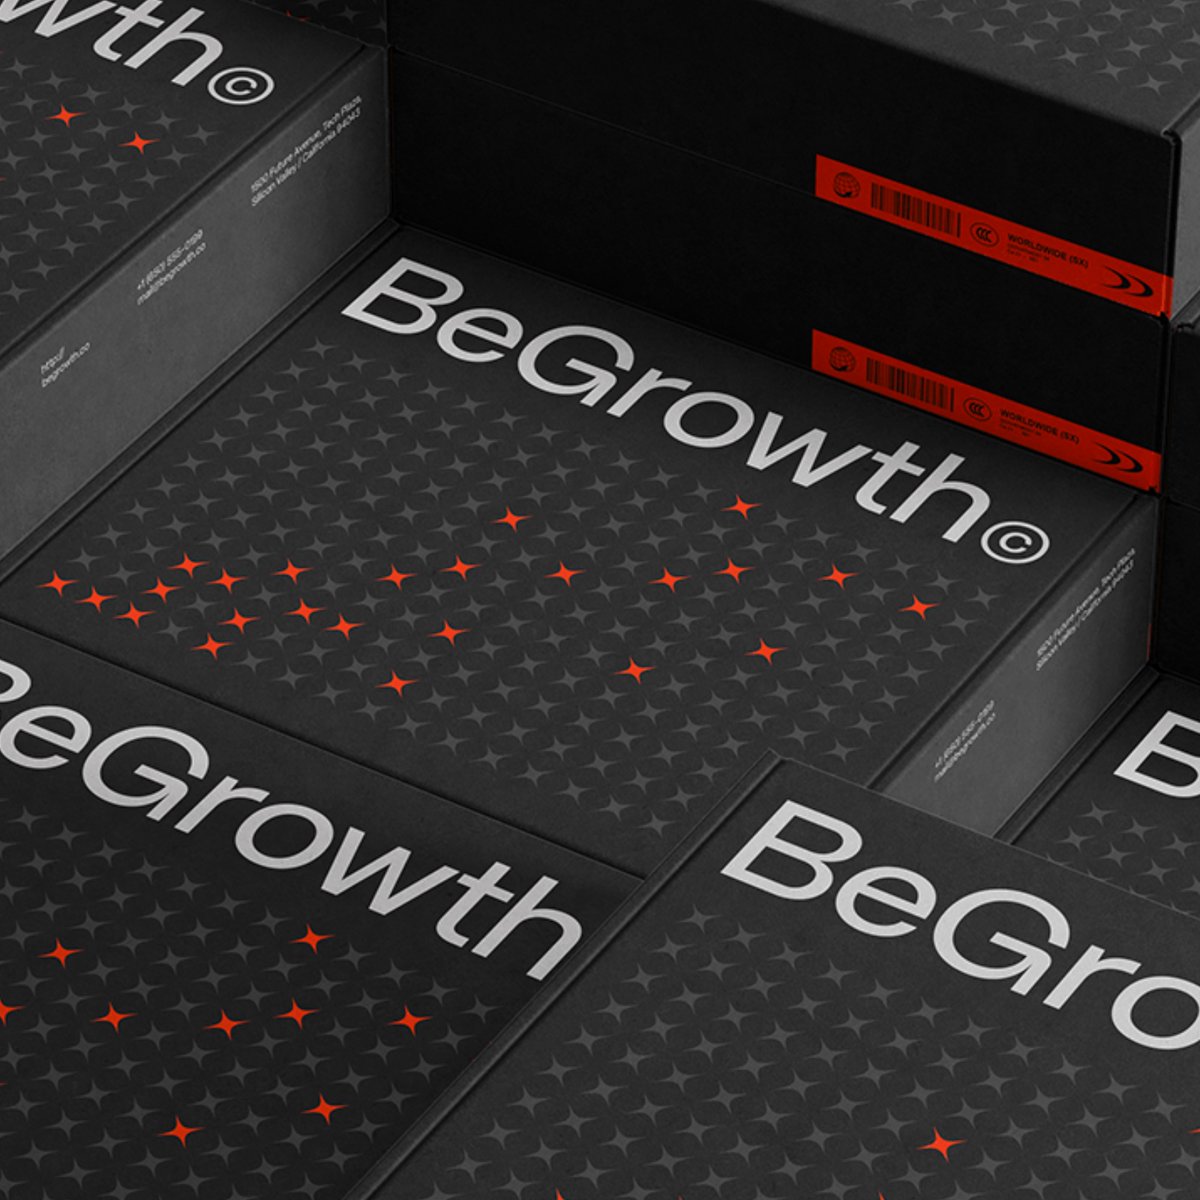 Branding: A Deep Dive into BeGrowth's Visual Identity dlvr.it/T2HVf4